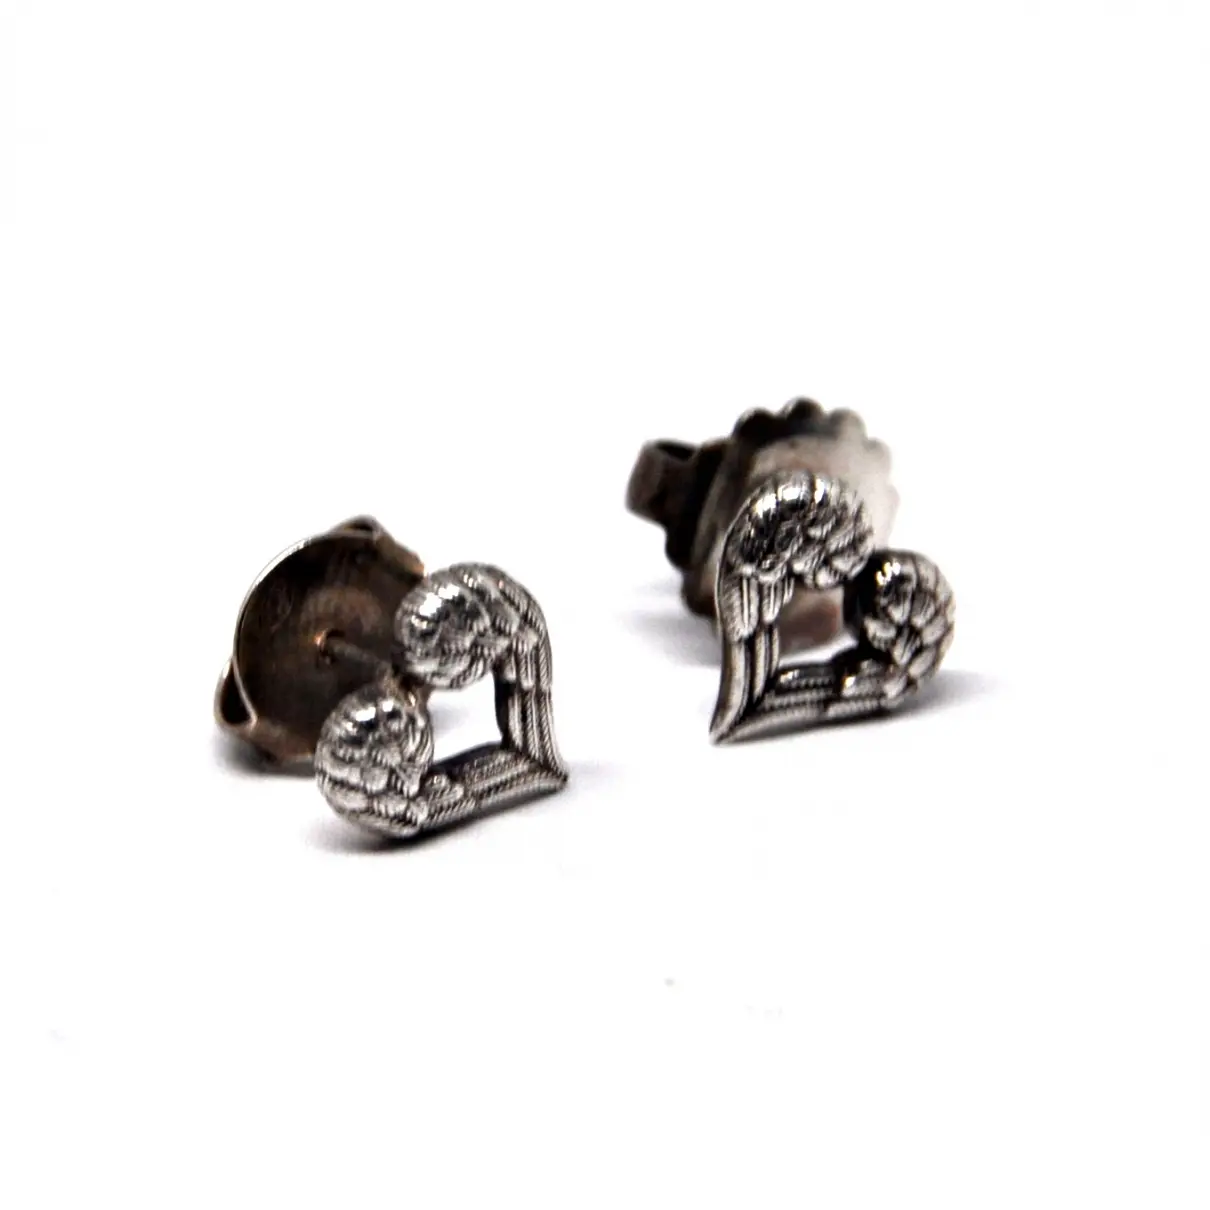 Thomas Sabo Silver earrings for sale